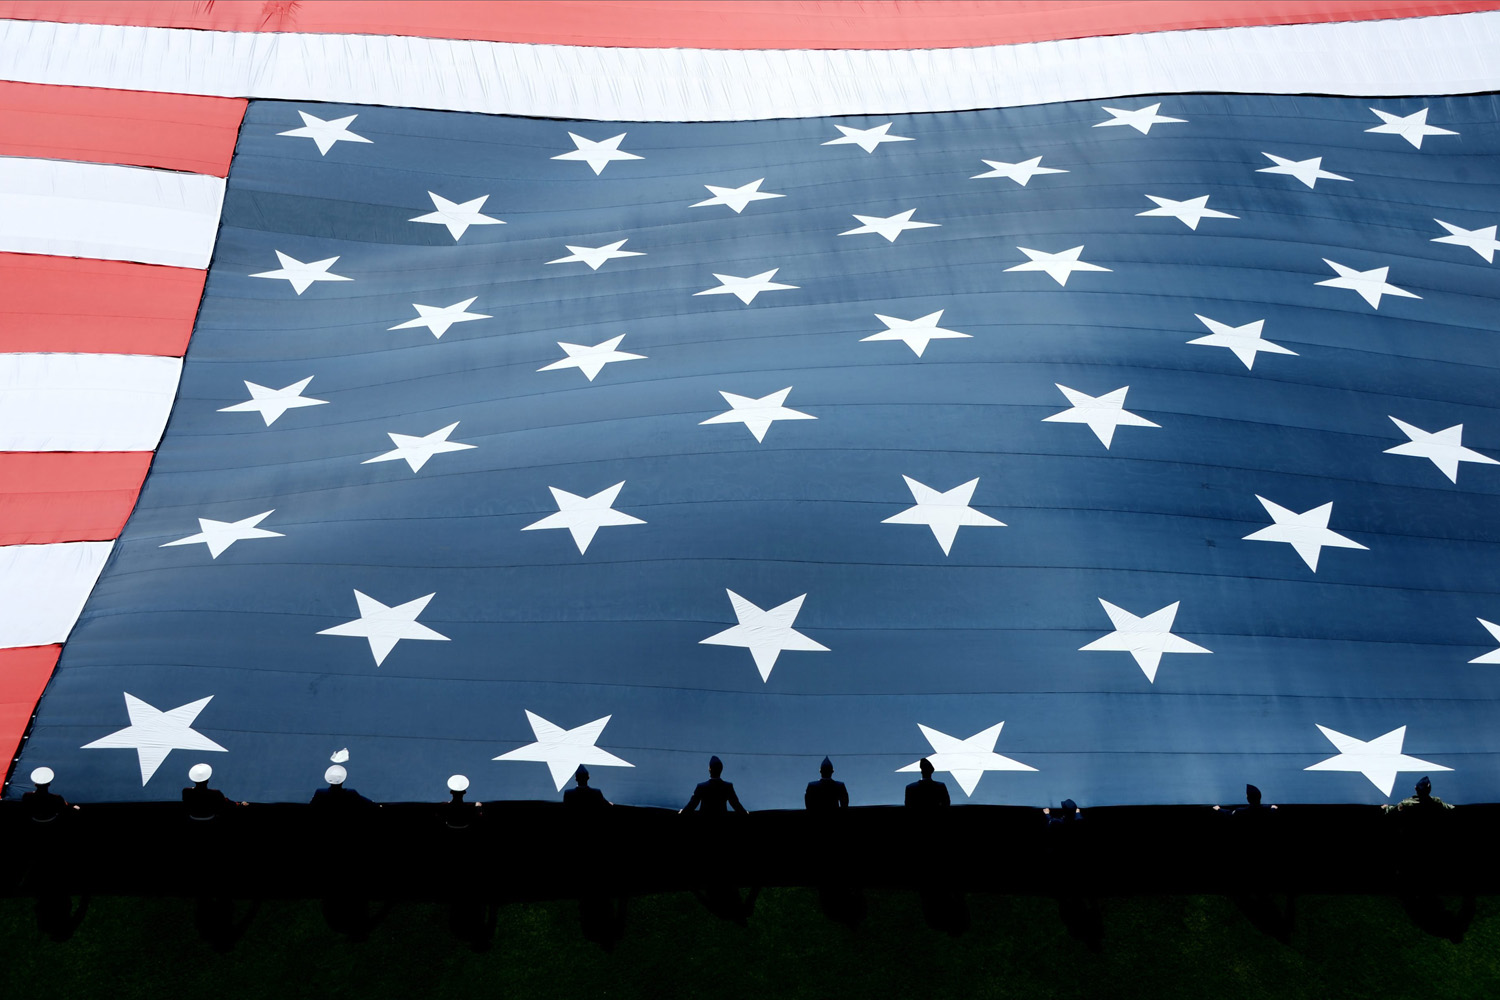 Mar. 31, 2014. A giant American flag is unfurled on the field during ceremonies before the start of the game between the Washington Nationals and the New York Mets at Citi Field in Flushing Meadows, New York. (Justin Lane—EPA)